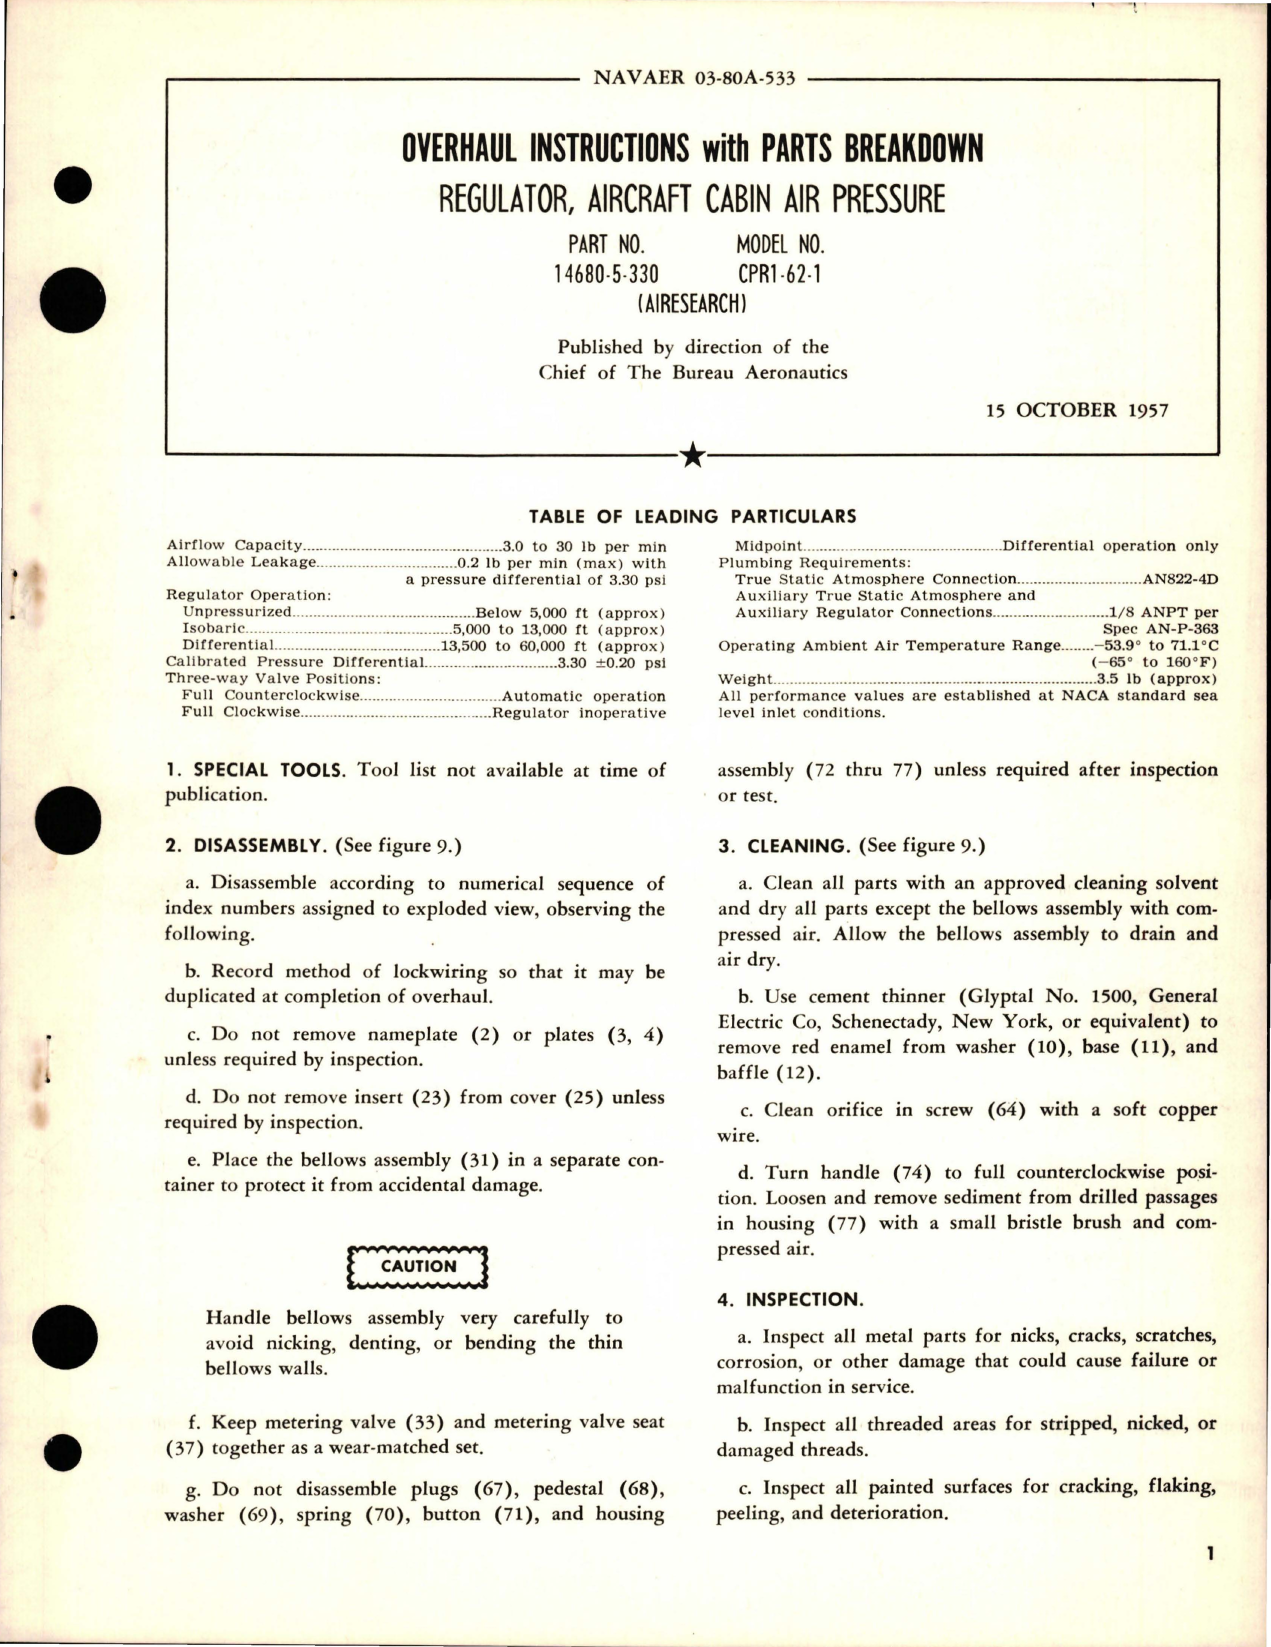 Sample page 1 from AirCorps Library document: Overhaul Instructions with Parts Breakdown for Aircraft Cabin Air Pressure Regulator - Part 14680-5-330 - Model CPR1-62-1